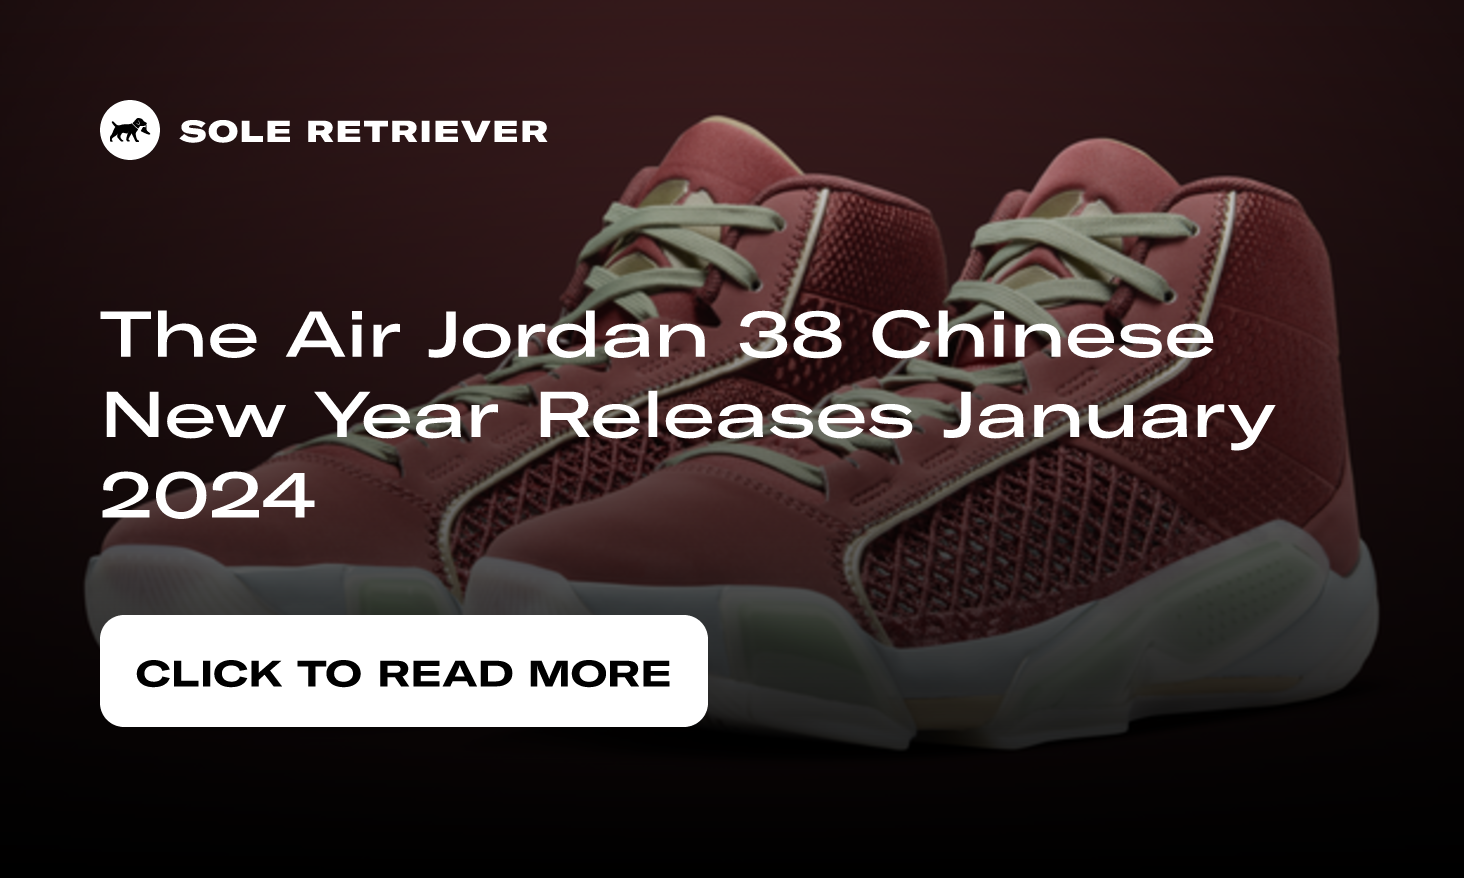 Buy cny 2024 At Sale Prices Online - January 2024